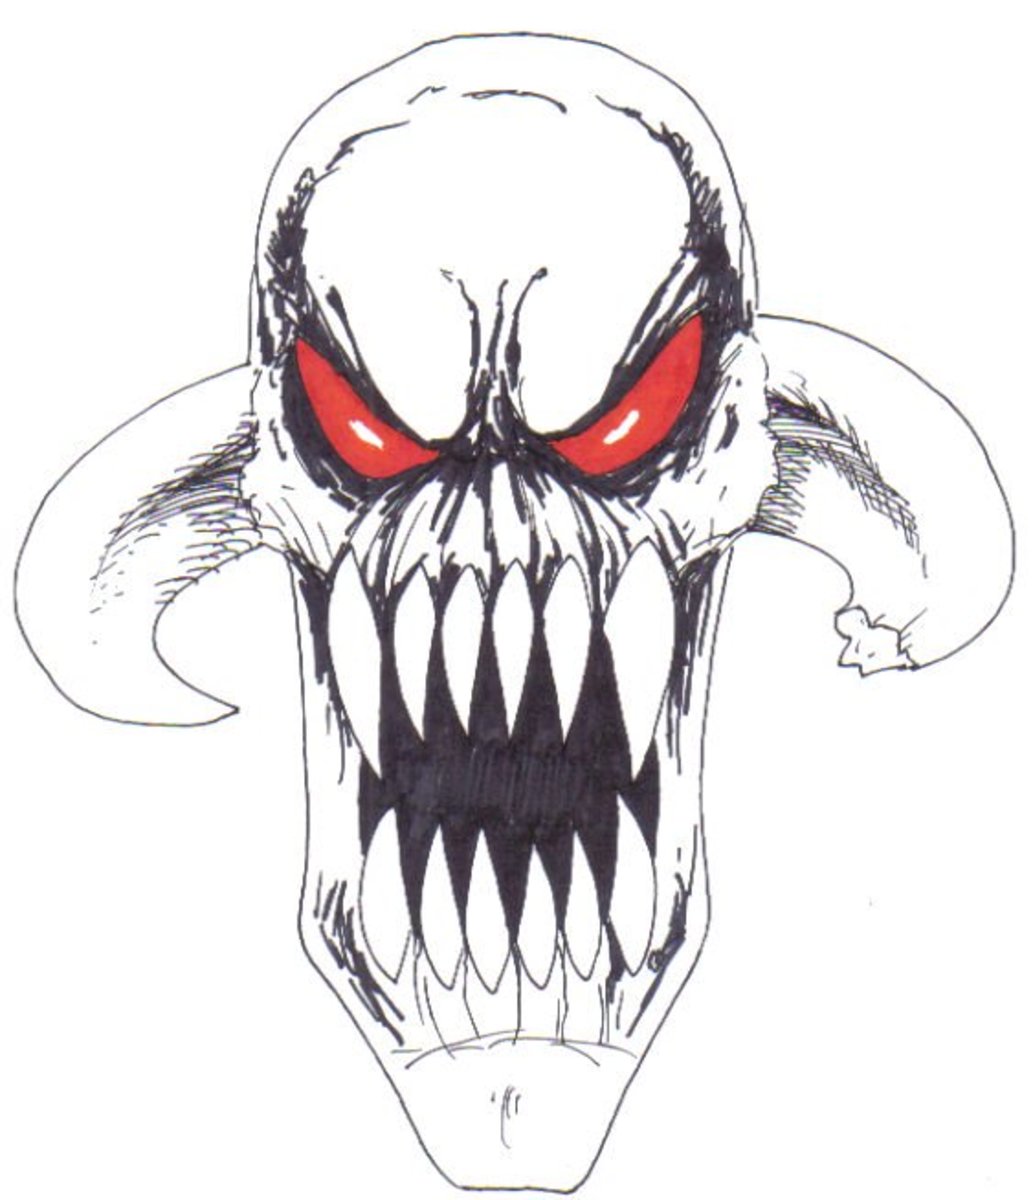 Demonic Art: How To Draw A Demon | HubPages